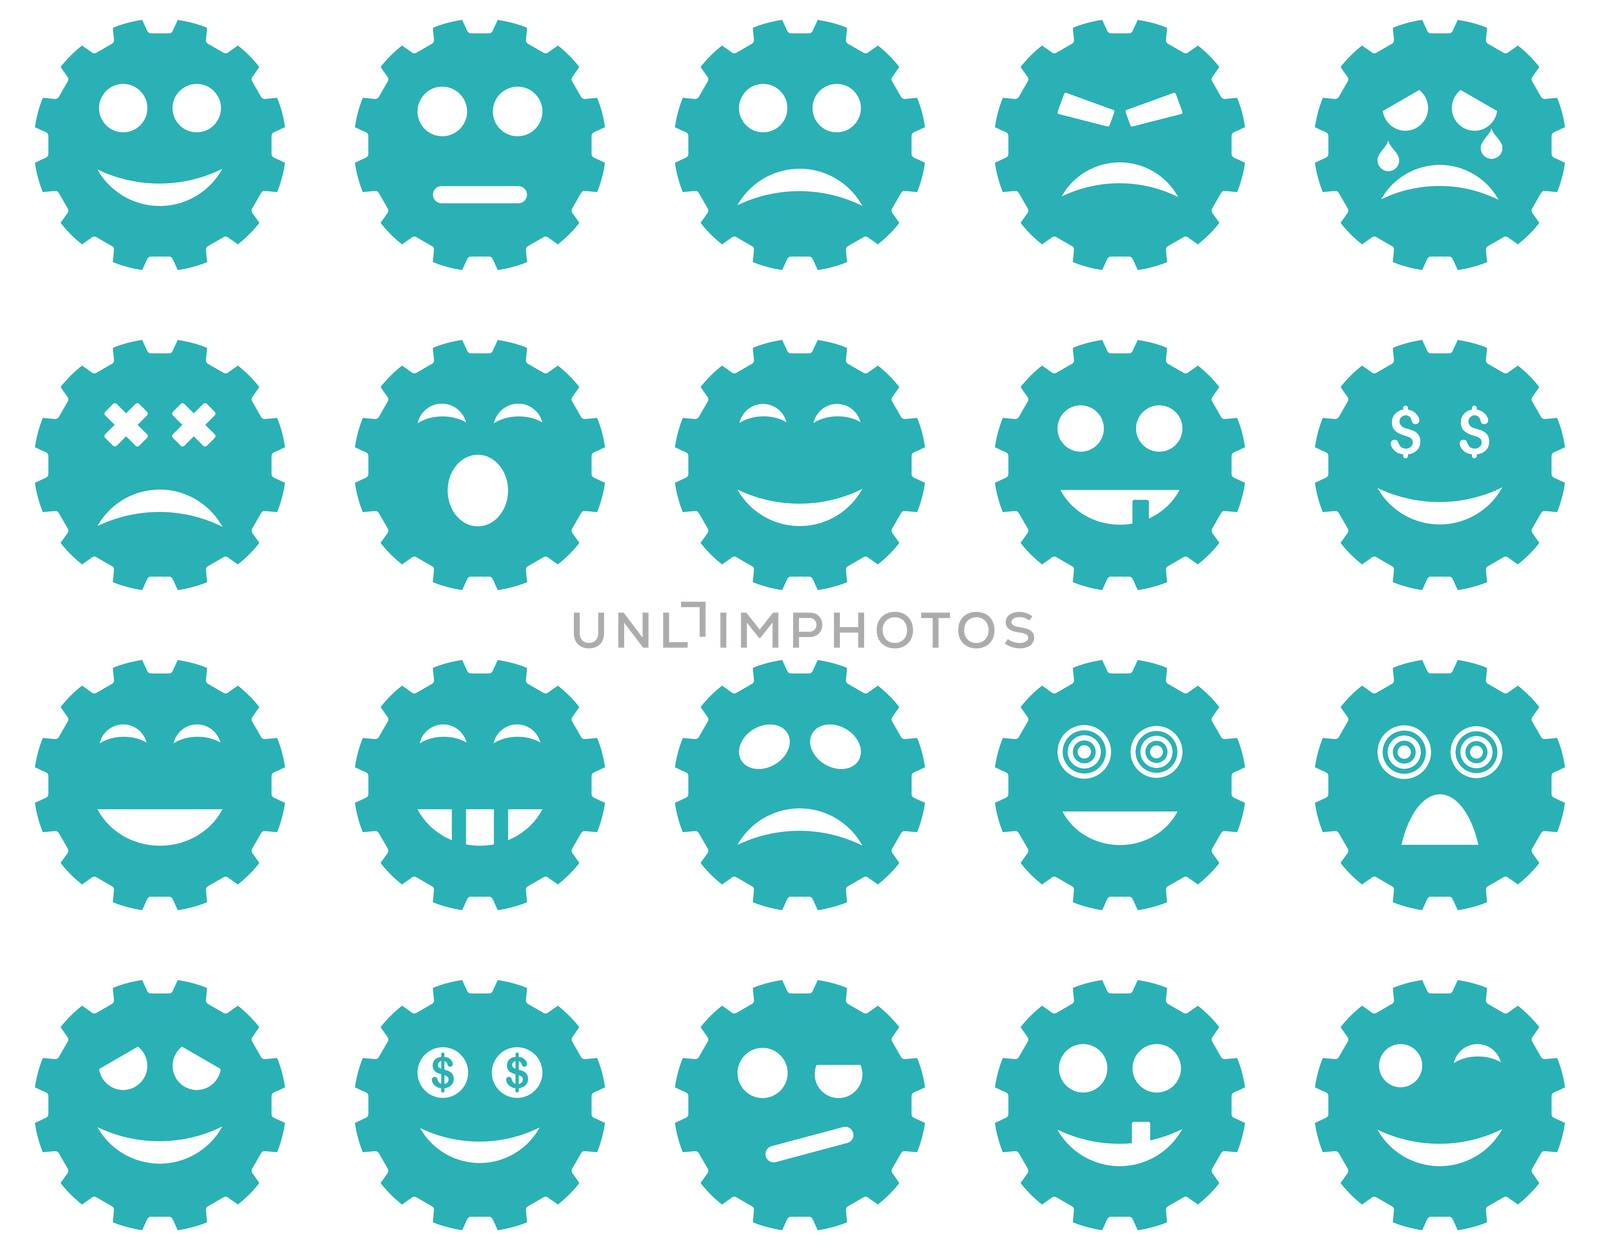 Gear emotion icons. Glyph set style is flat images, cyan symbols, isolated on a white background.